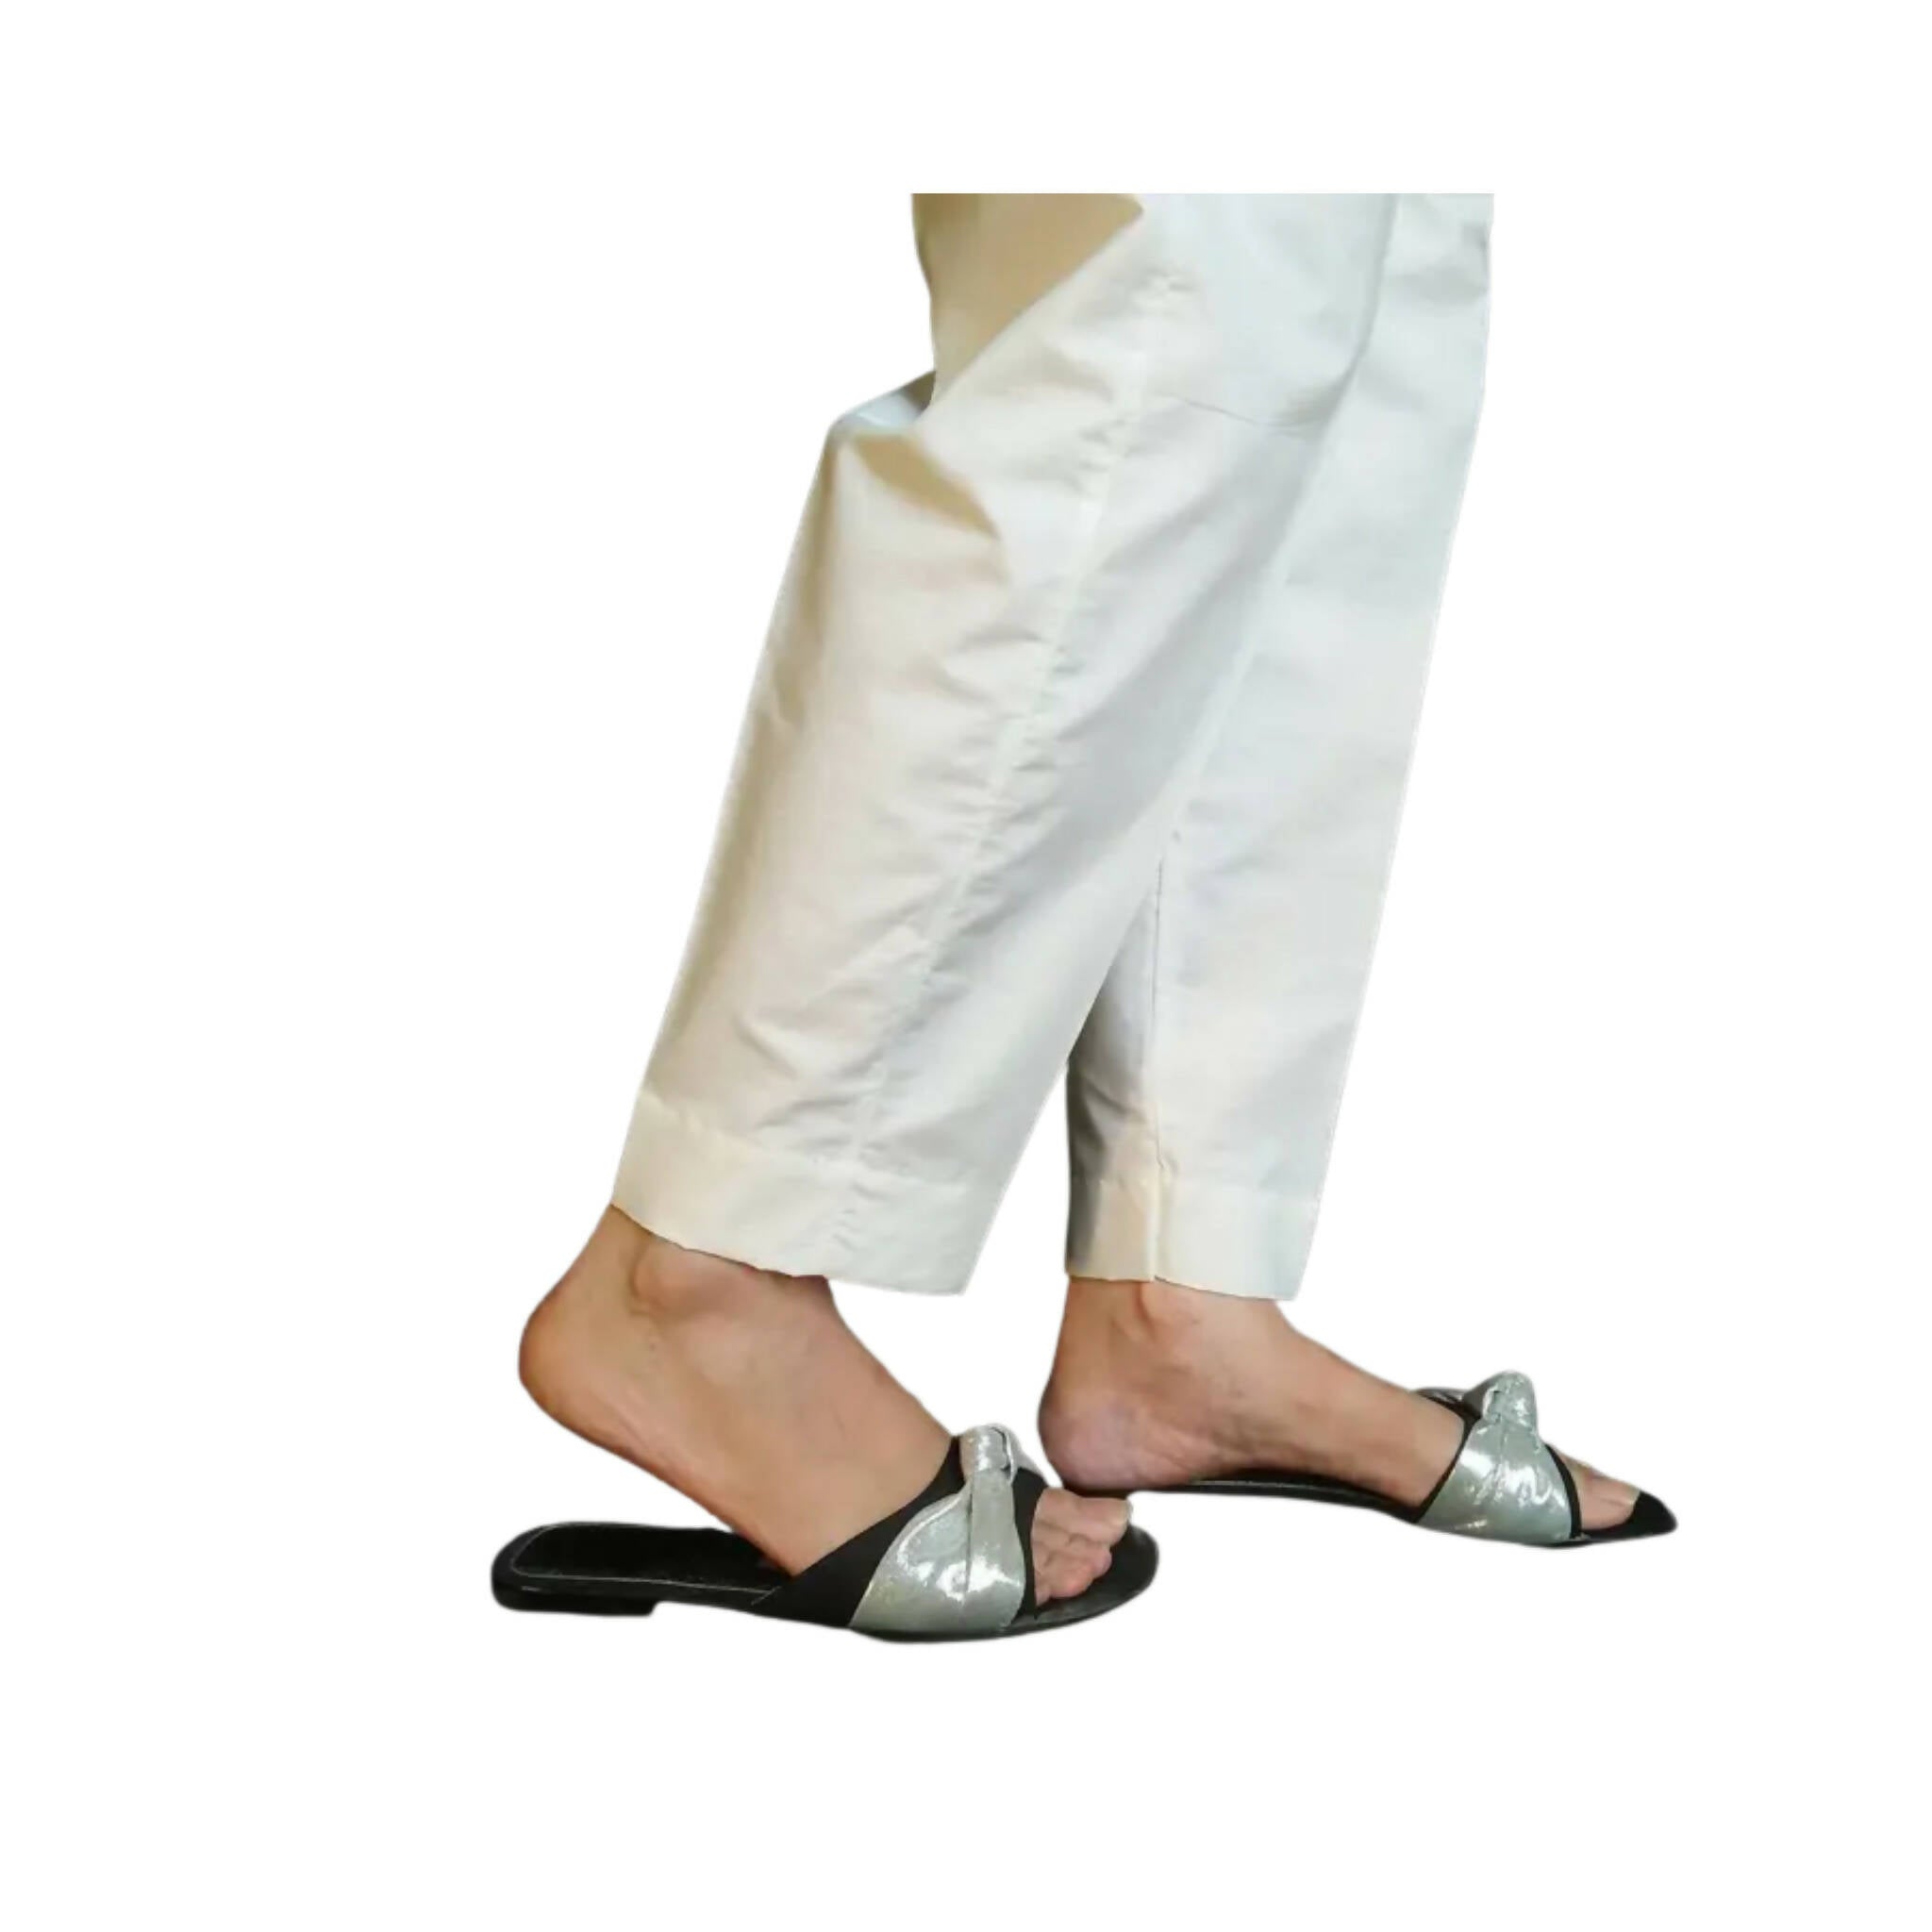 Trouser, White Cotton & Comfortable to Wear, for Women